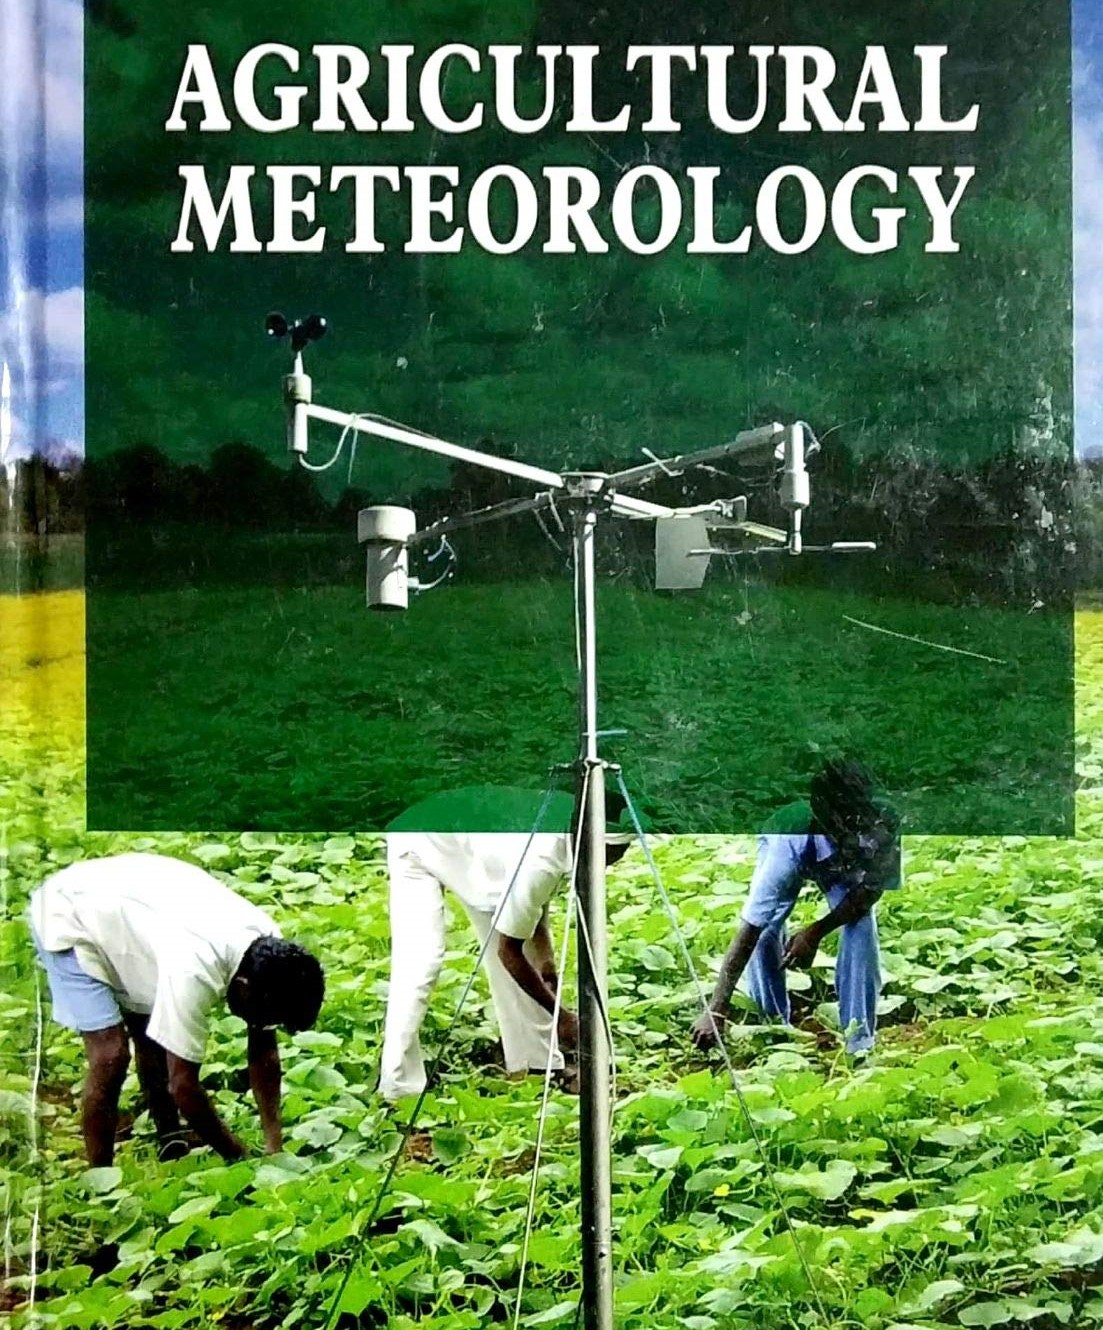 2020 Unit 2 C&D Batch Introductory Agro-Meteorology and Climate Change Agmt1101